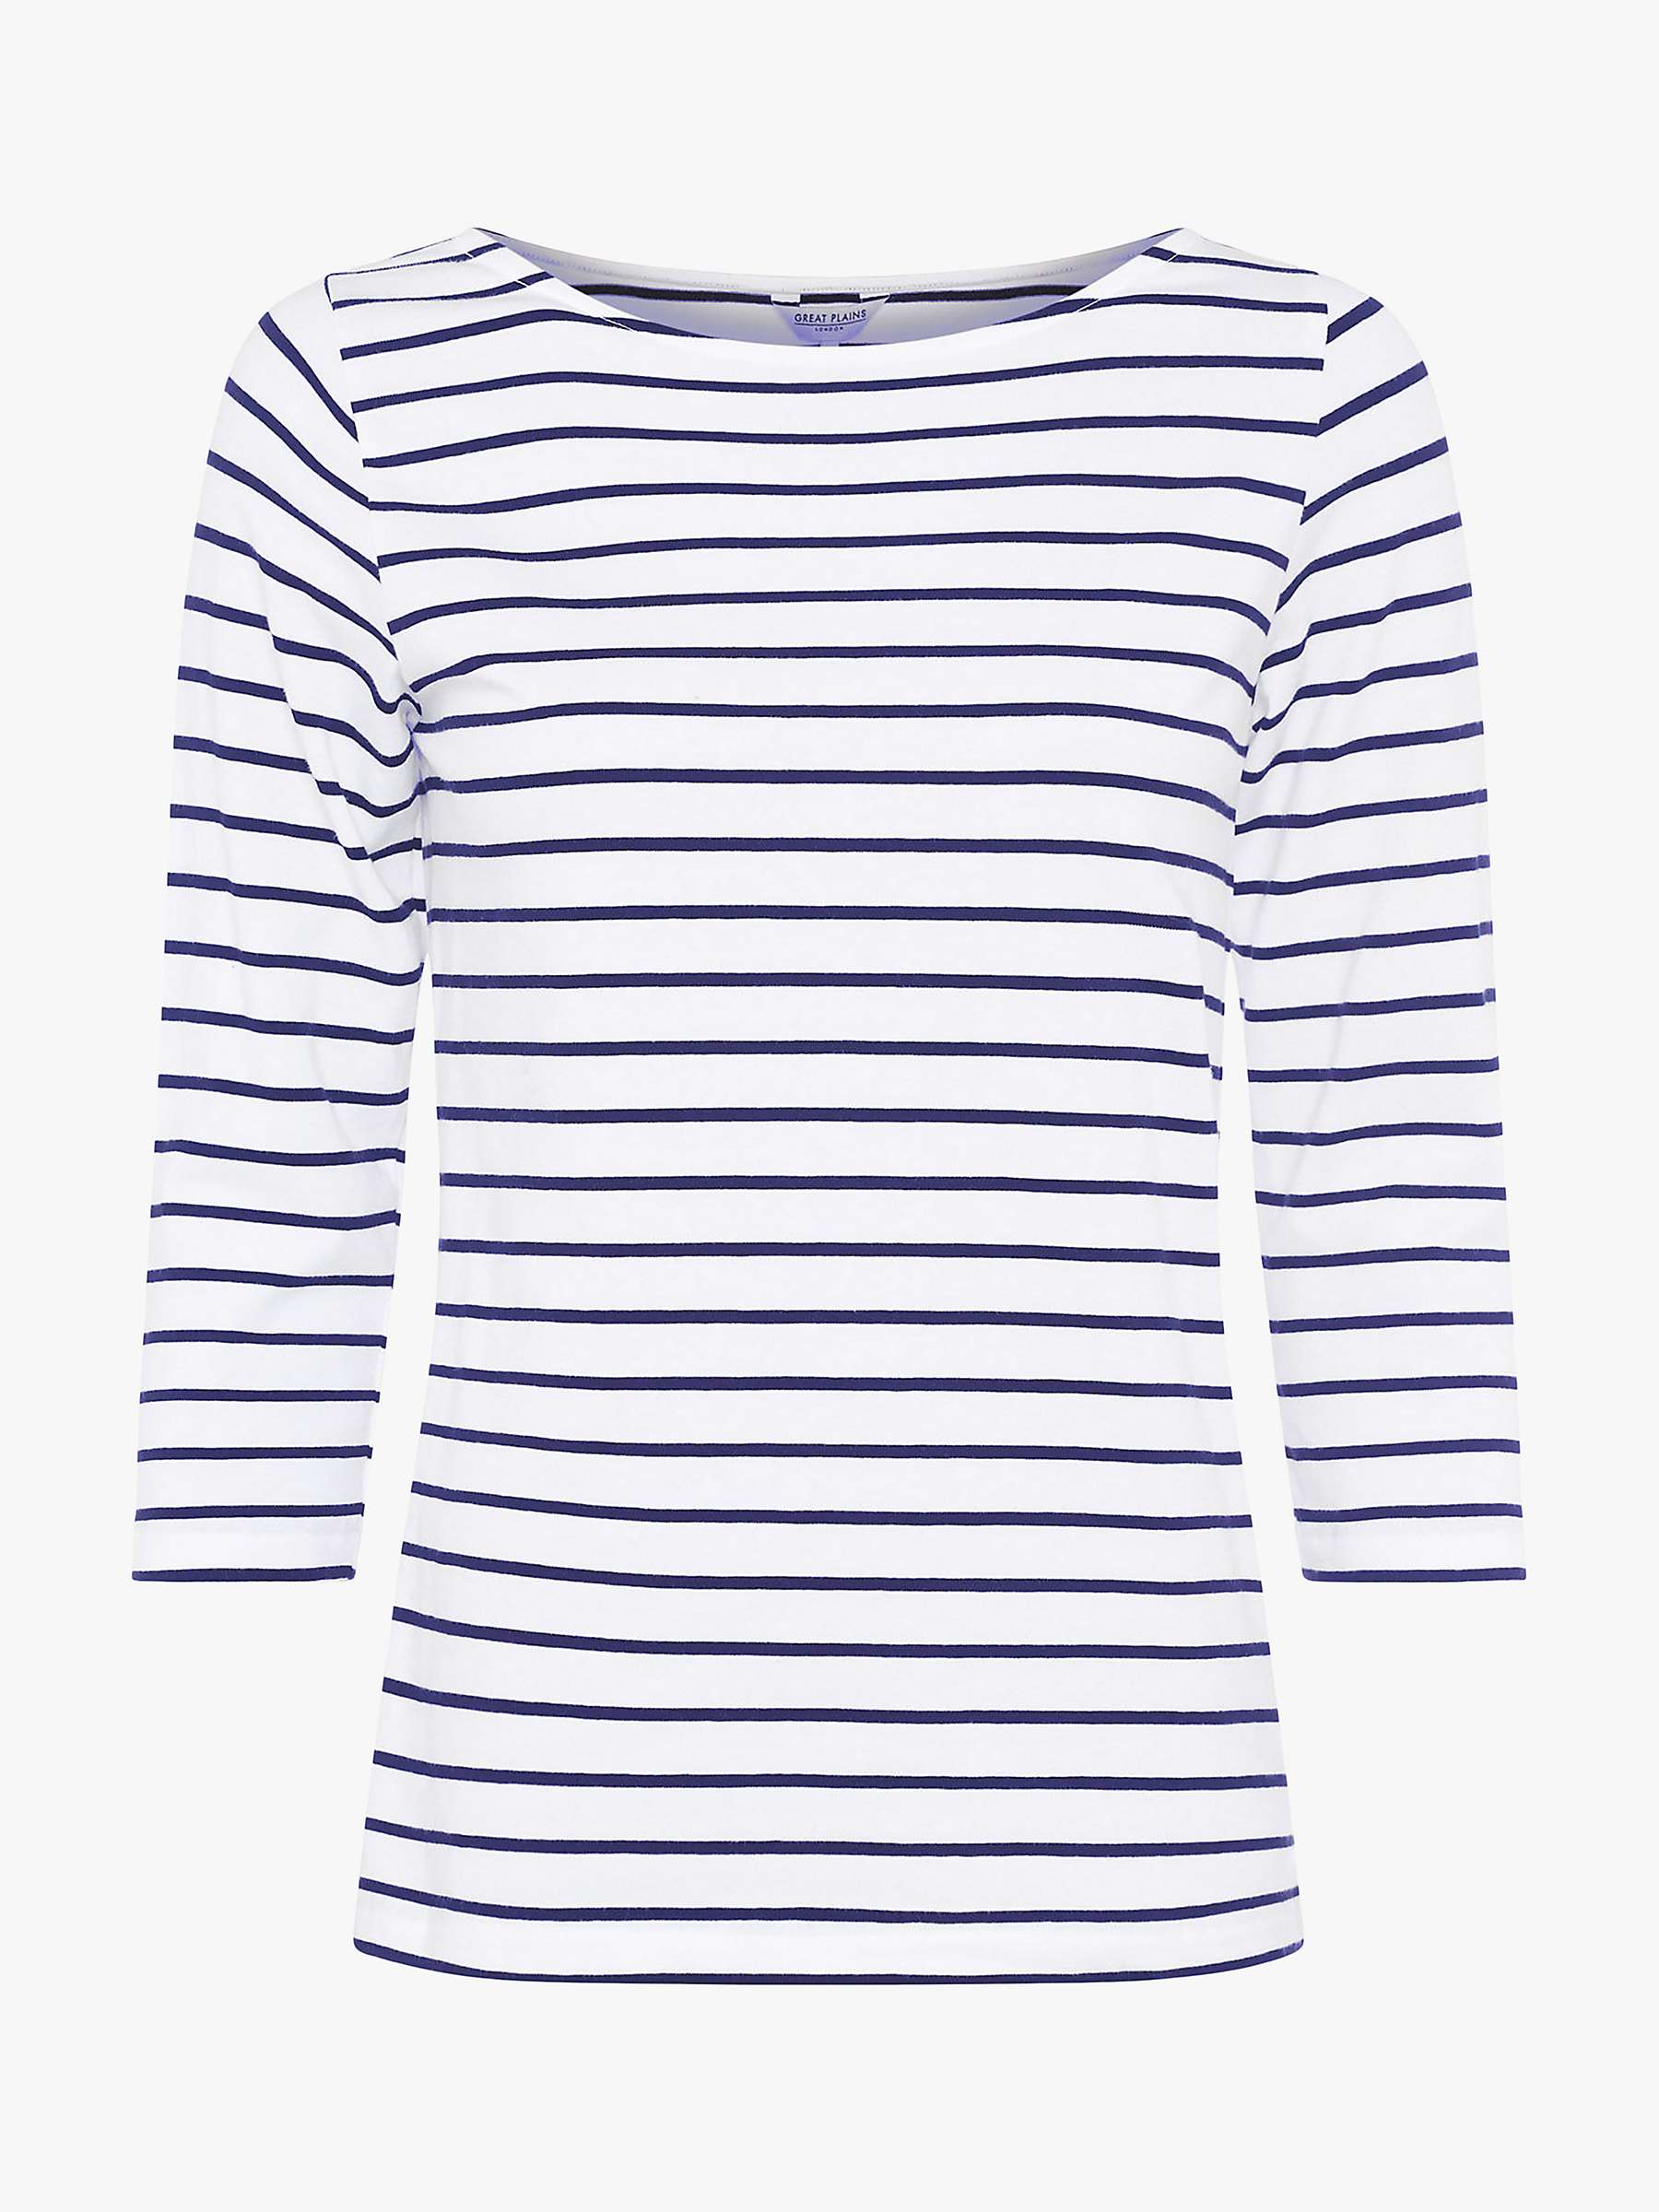 Buy Great Plains Core 3/4 Sleeve T-Shirt Online at johnlewis.com